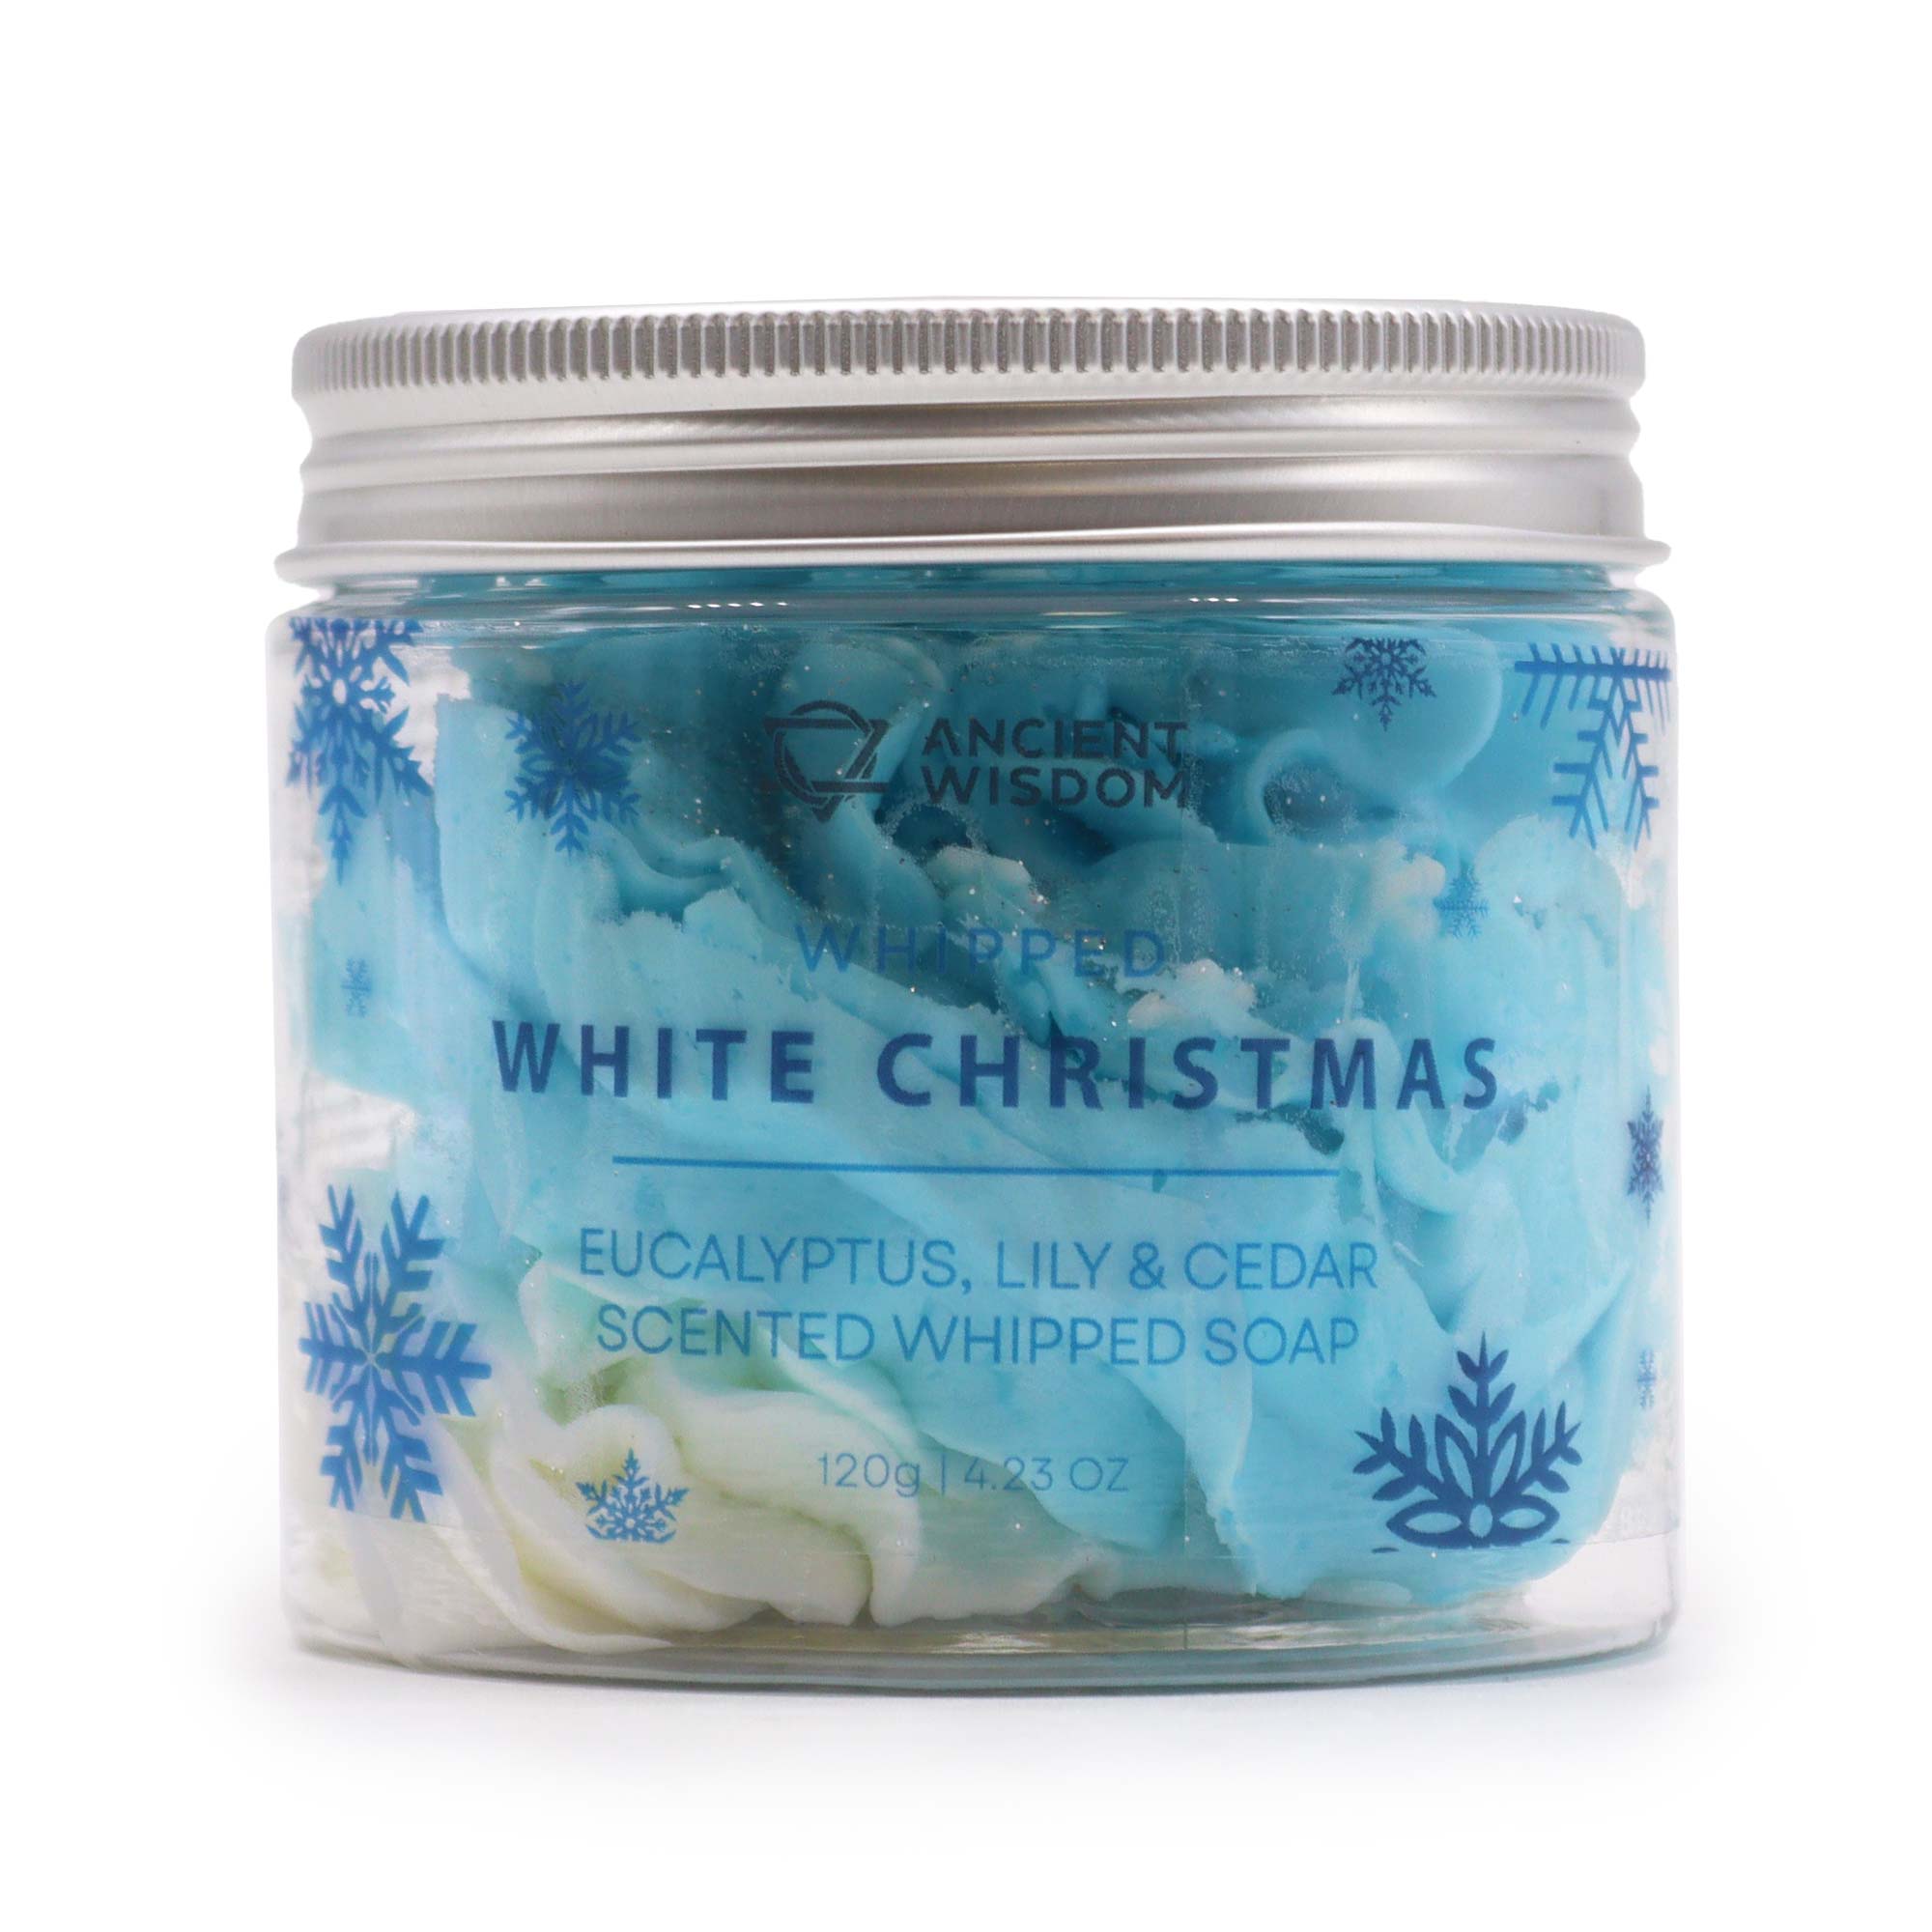 View White Christmas Whipped Soap 120g information